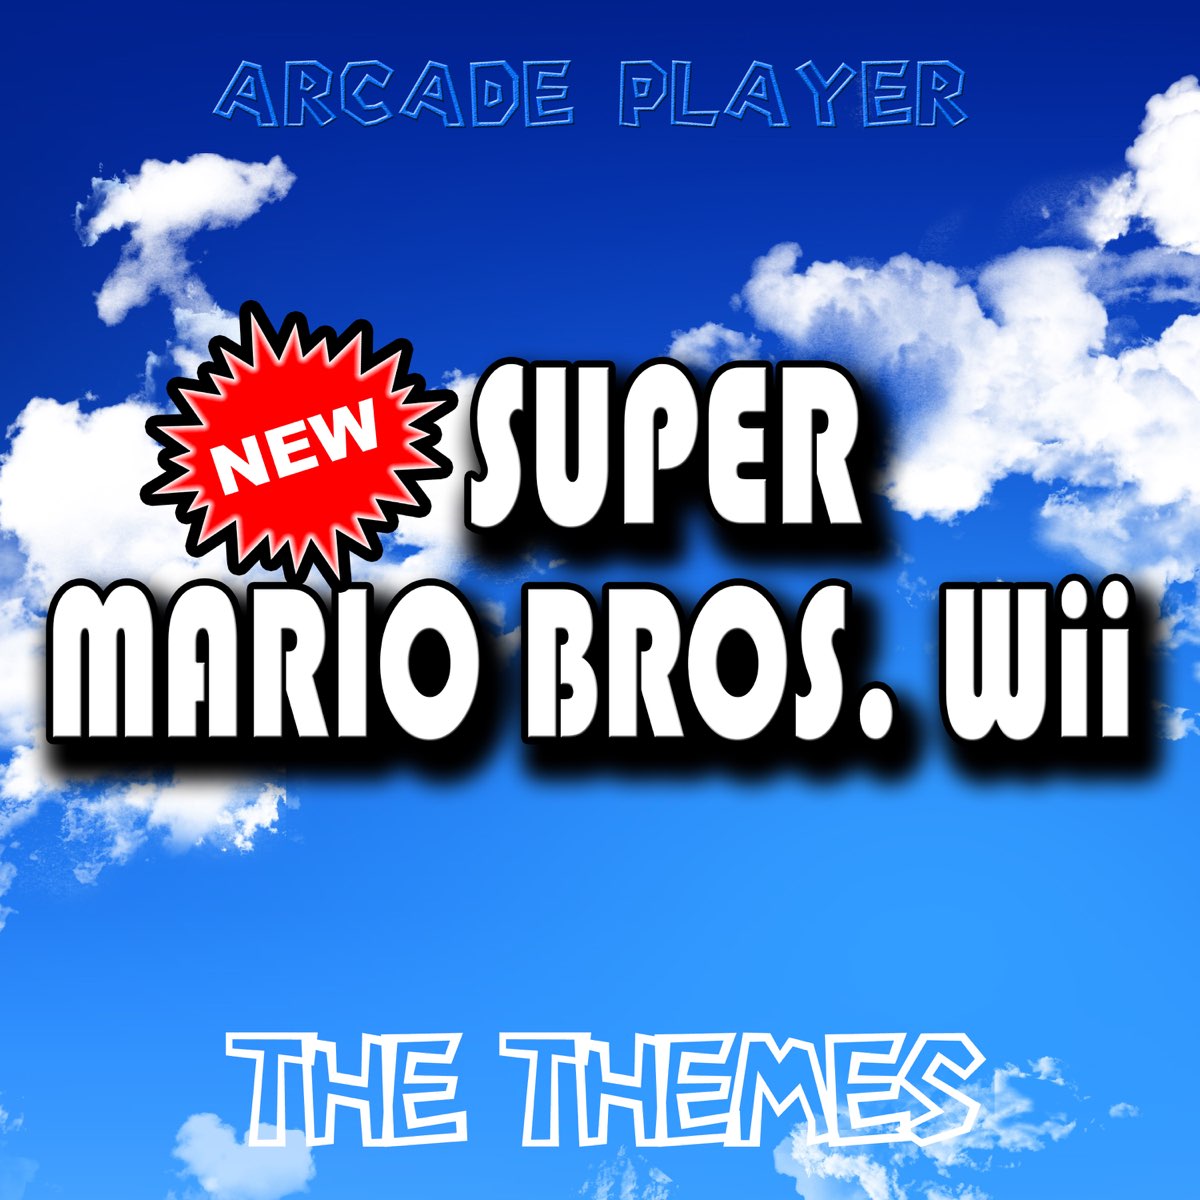 Newer Super Mario Bros Wii - All Castles (2 Player) 